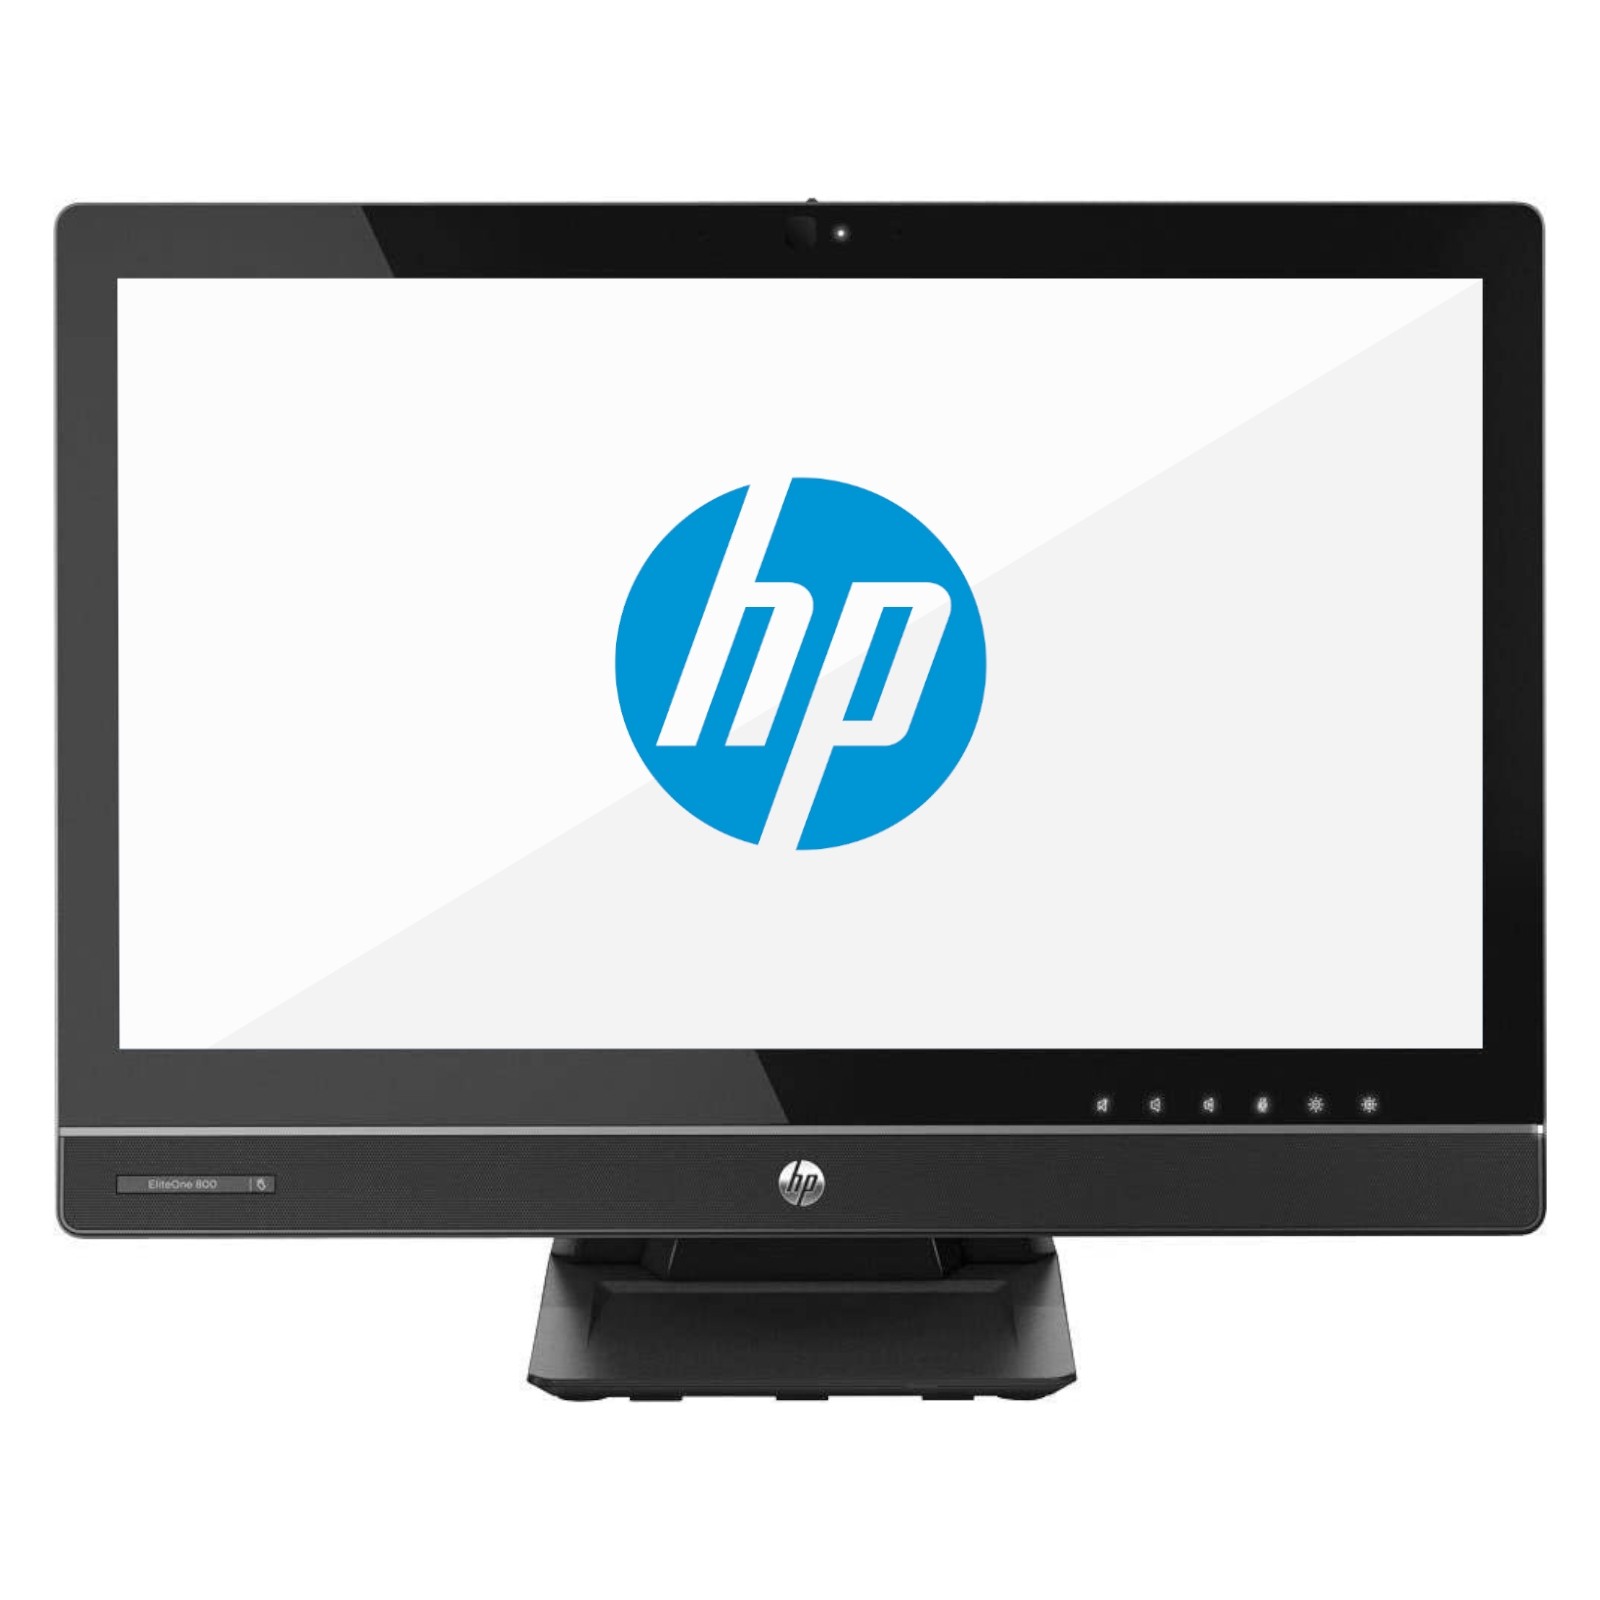 HP EliteOne 800 G1 23 Inch All-in-One AIO Desktop PC Front